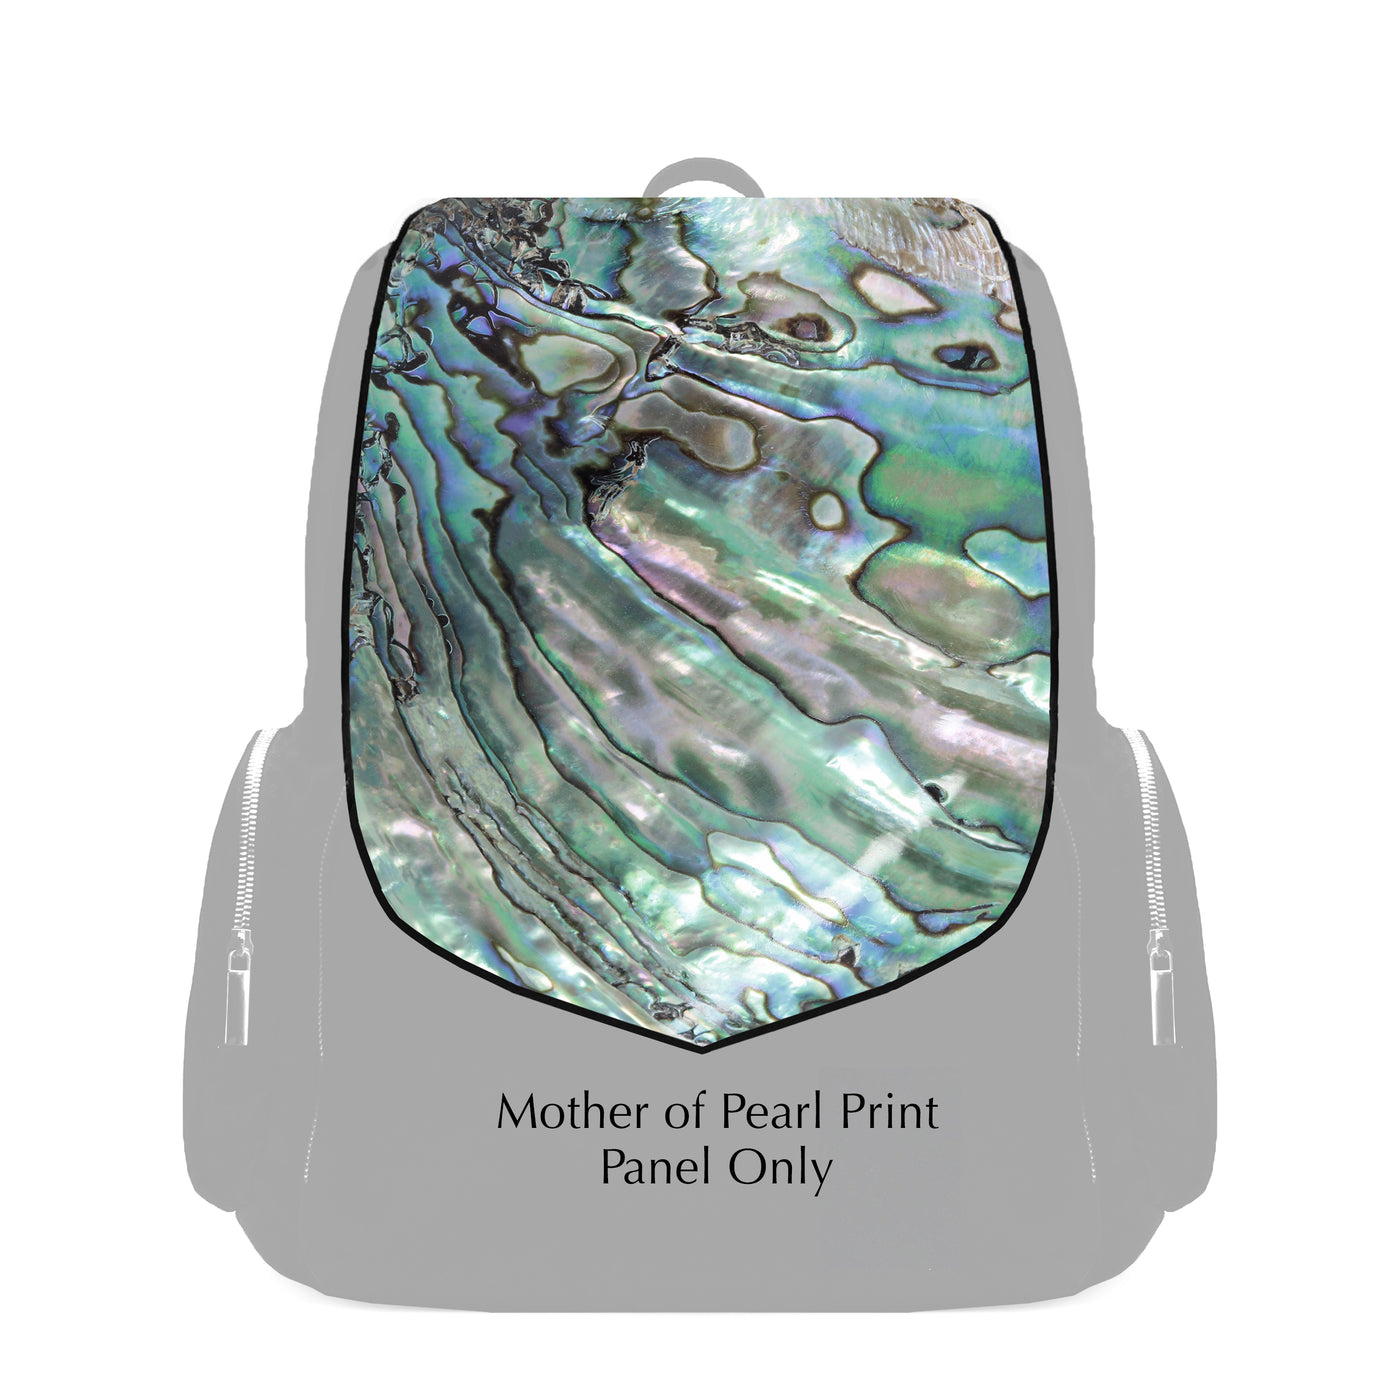 Panel Only in Mother of Pearl Print